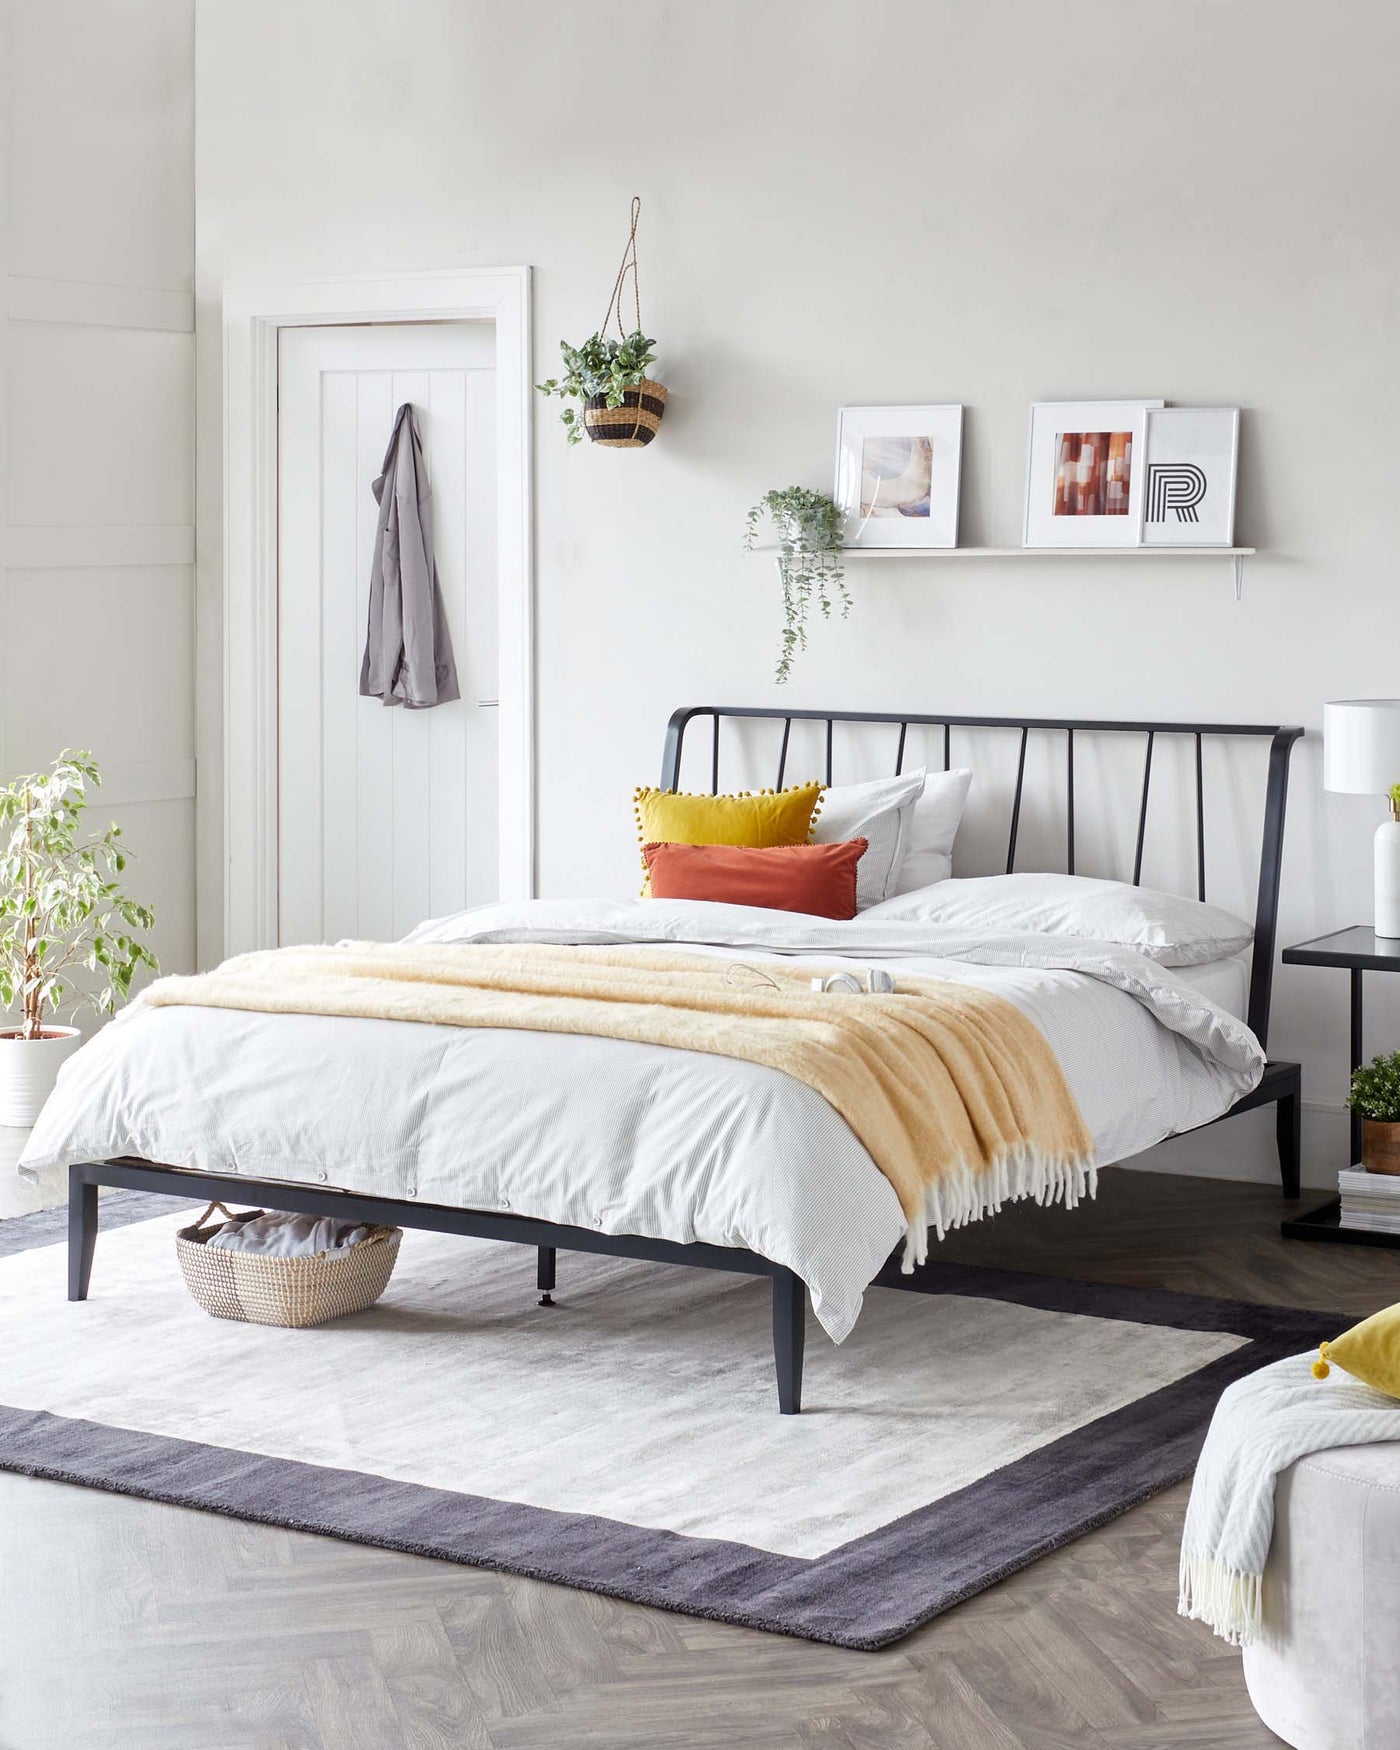 Modern minimalist black metal bed frame with clean lines and a matching black bedside table featuring a round tabletop and minimalistic frame. A white ottoman with tufted details is seen at the foot of the bed. The bed is complemented by soft white and beige bedding with colour-accented throw pillows.